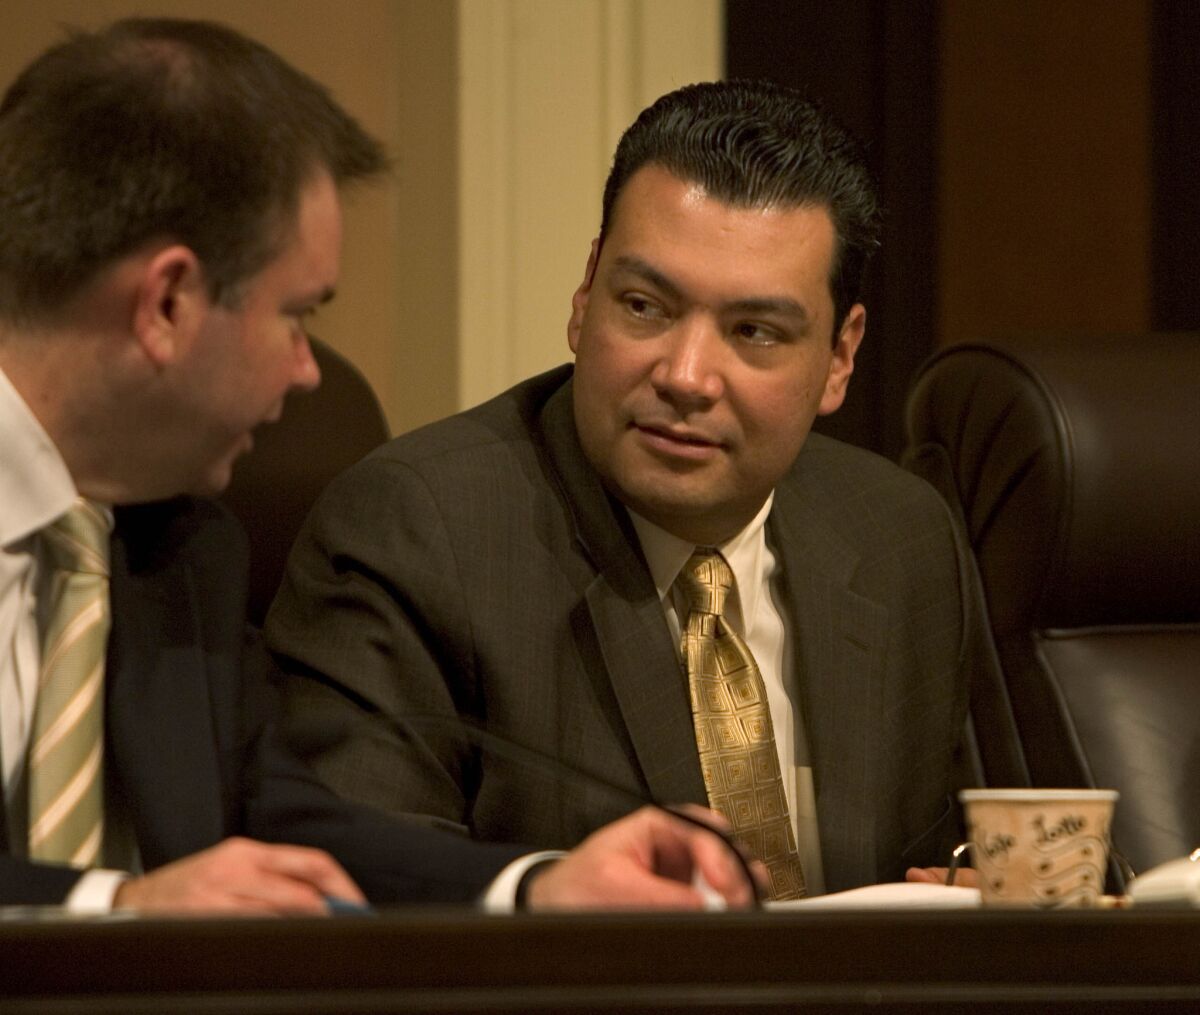 State Sen. Alex Padilla (D-Pacoima), right, listens to a staffer during a Senate committee hearing.